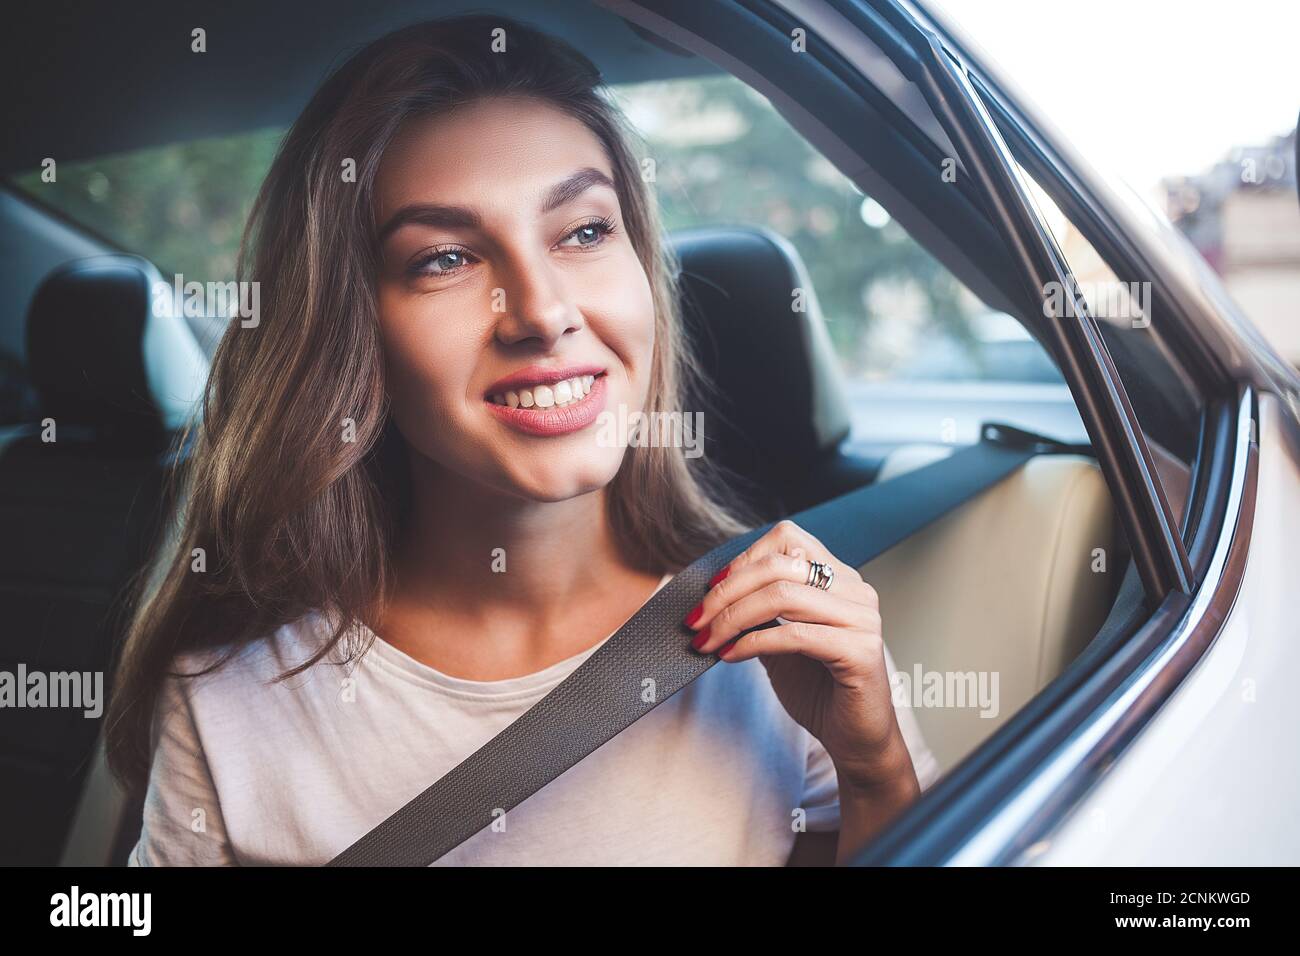 Attractive woman in car Stock Photo